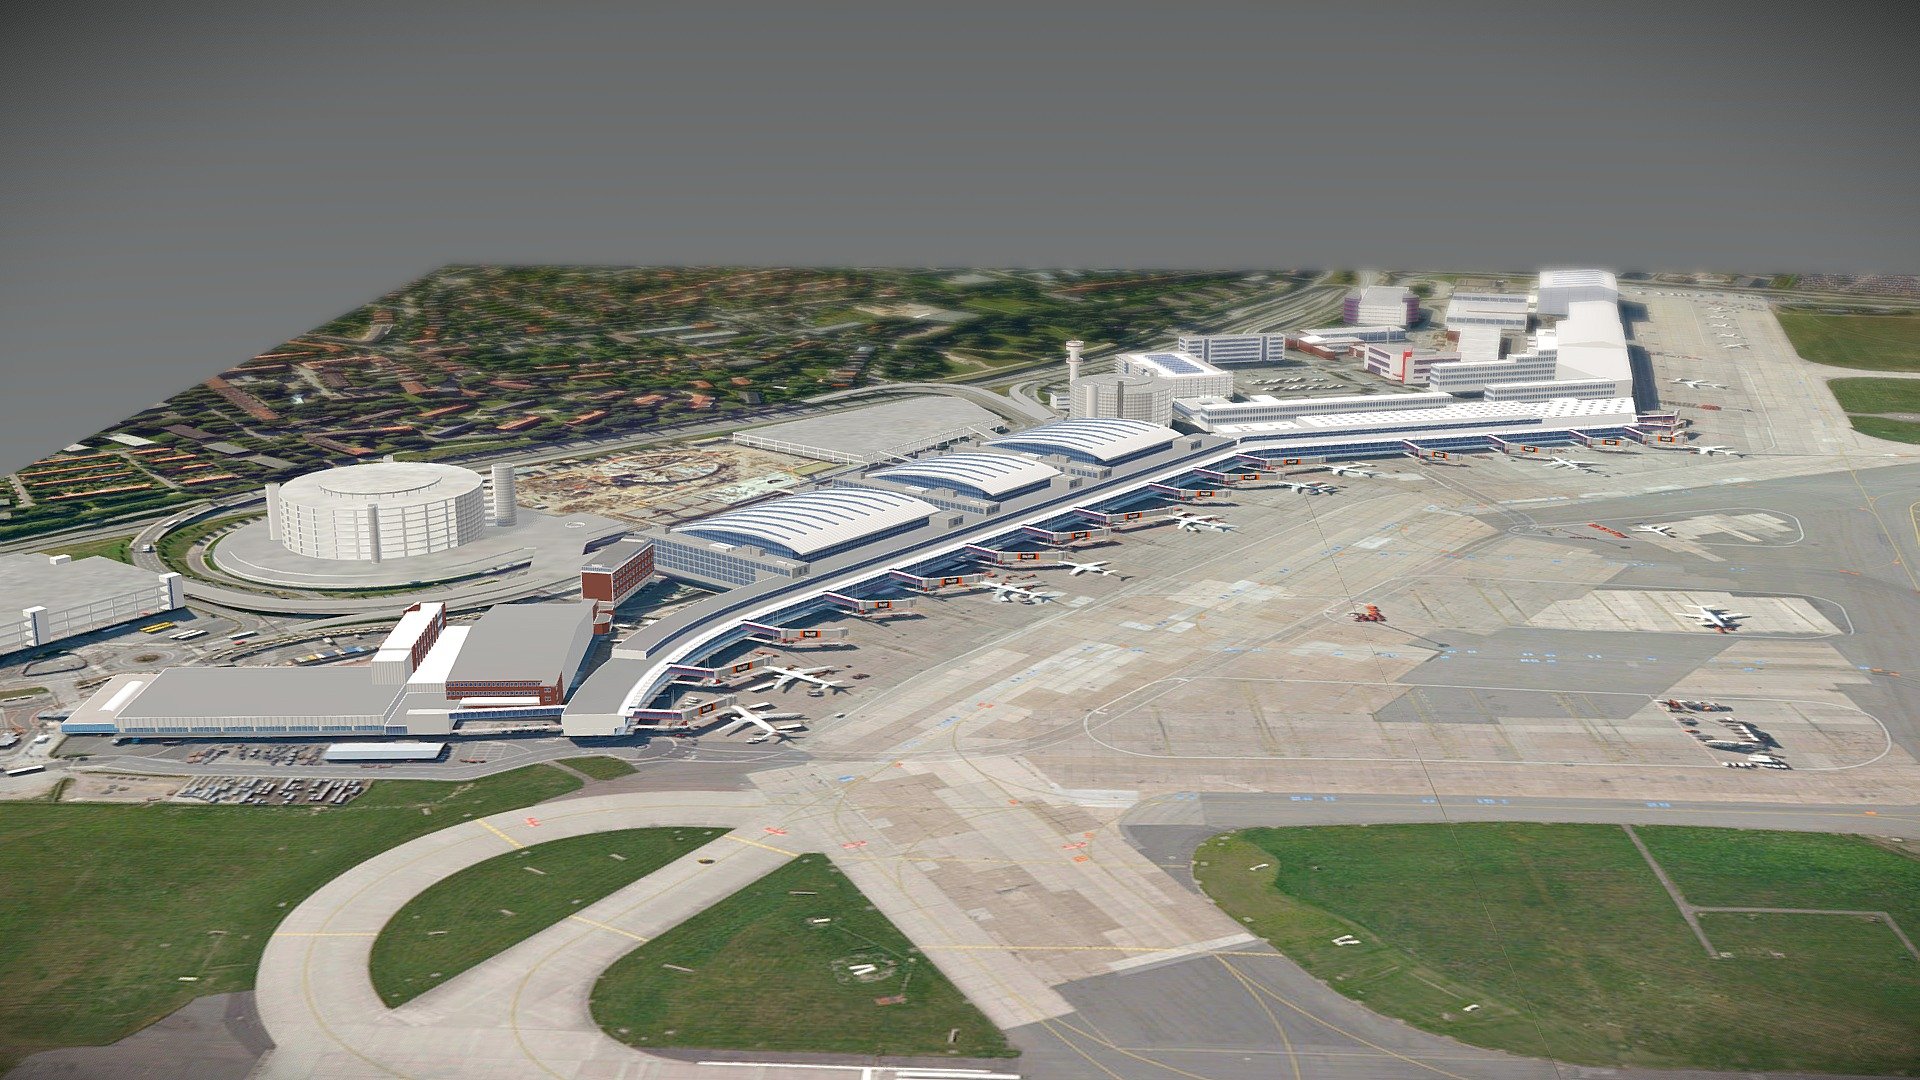 Hamburg airport. Main airport buildings and terminals modeled. Low poly models. The buildings share a texture sized 2000 pixels. The landscape consists of 8 individual planes each with a texture sized 2000 pixels square 3d model